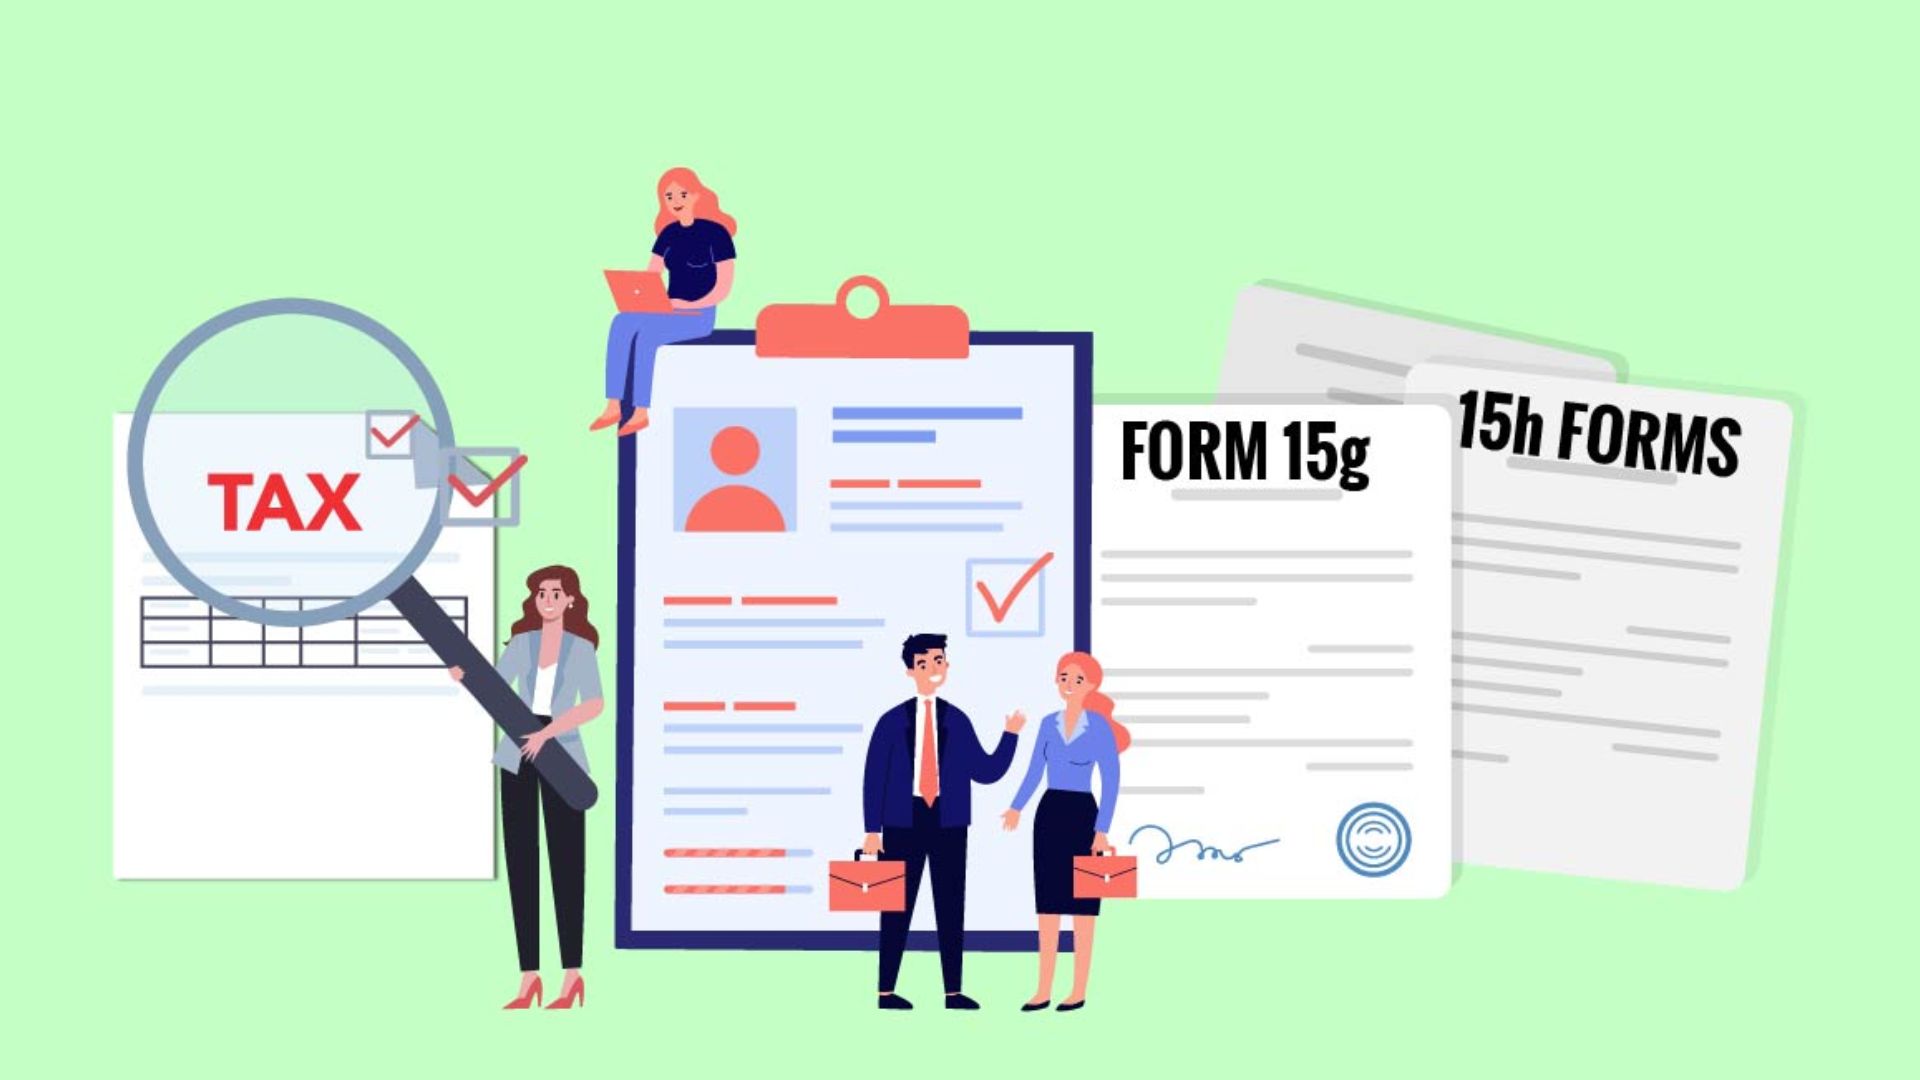 Understanding Forms 15G and 15H For Tax-saving Strategies for Senior Citizens